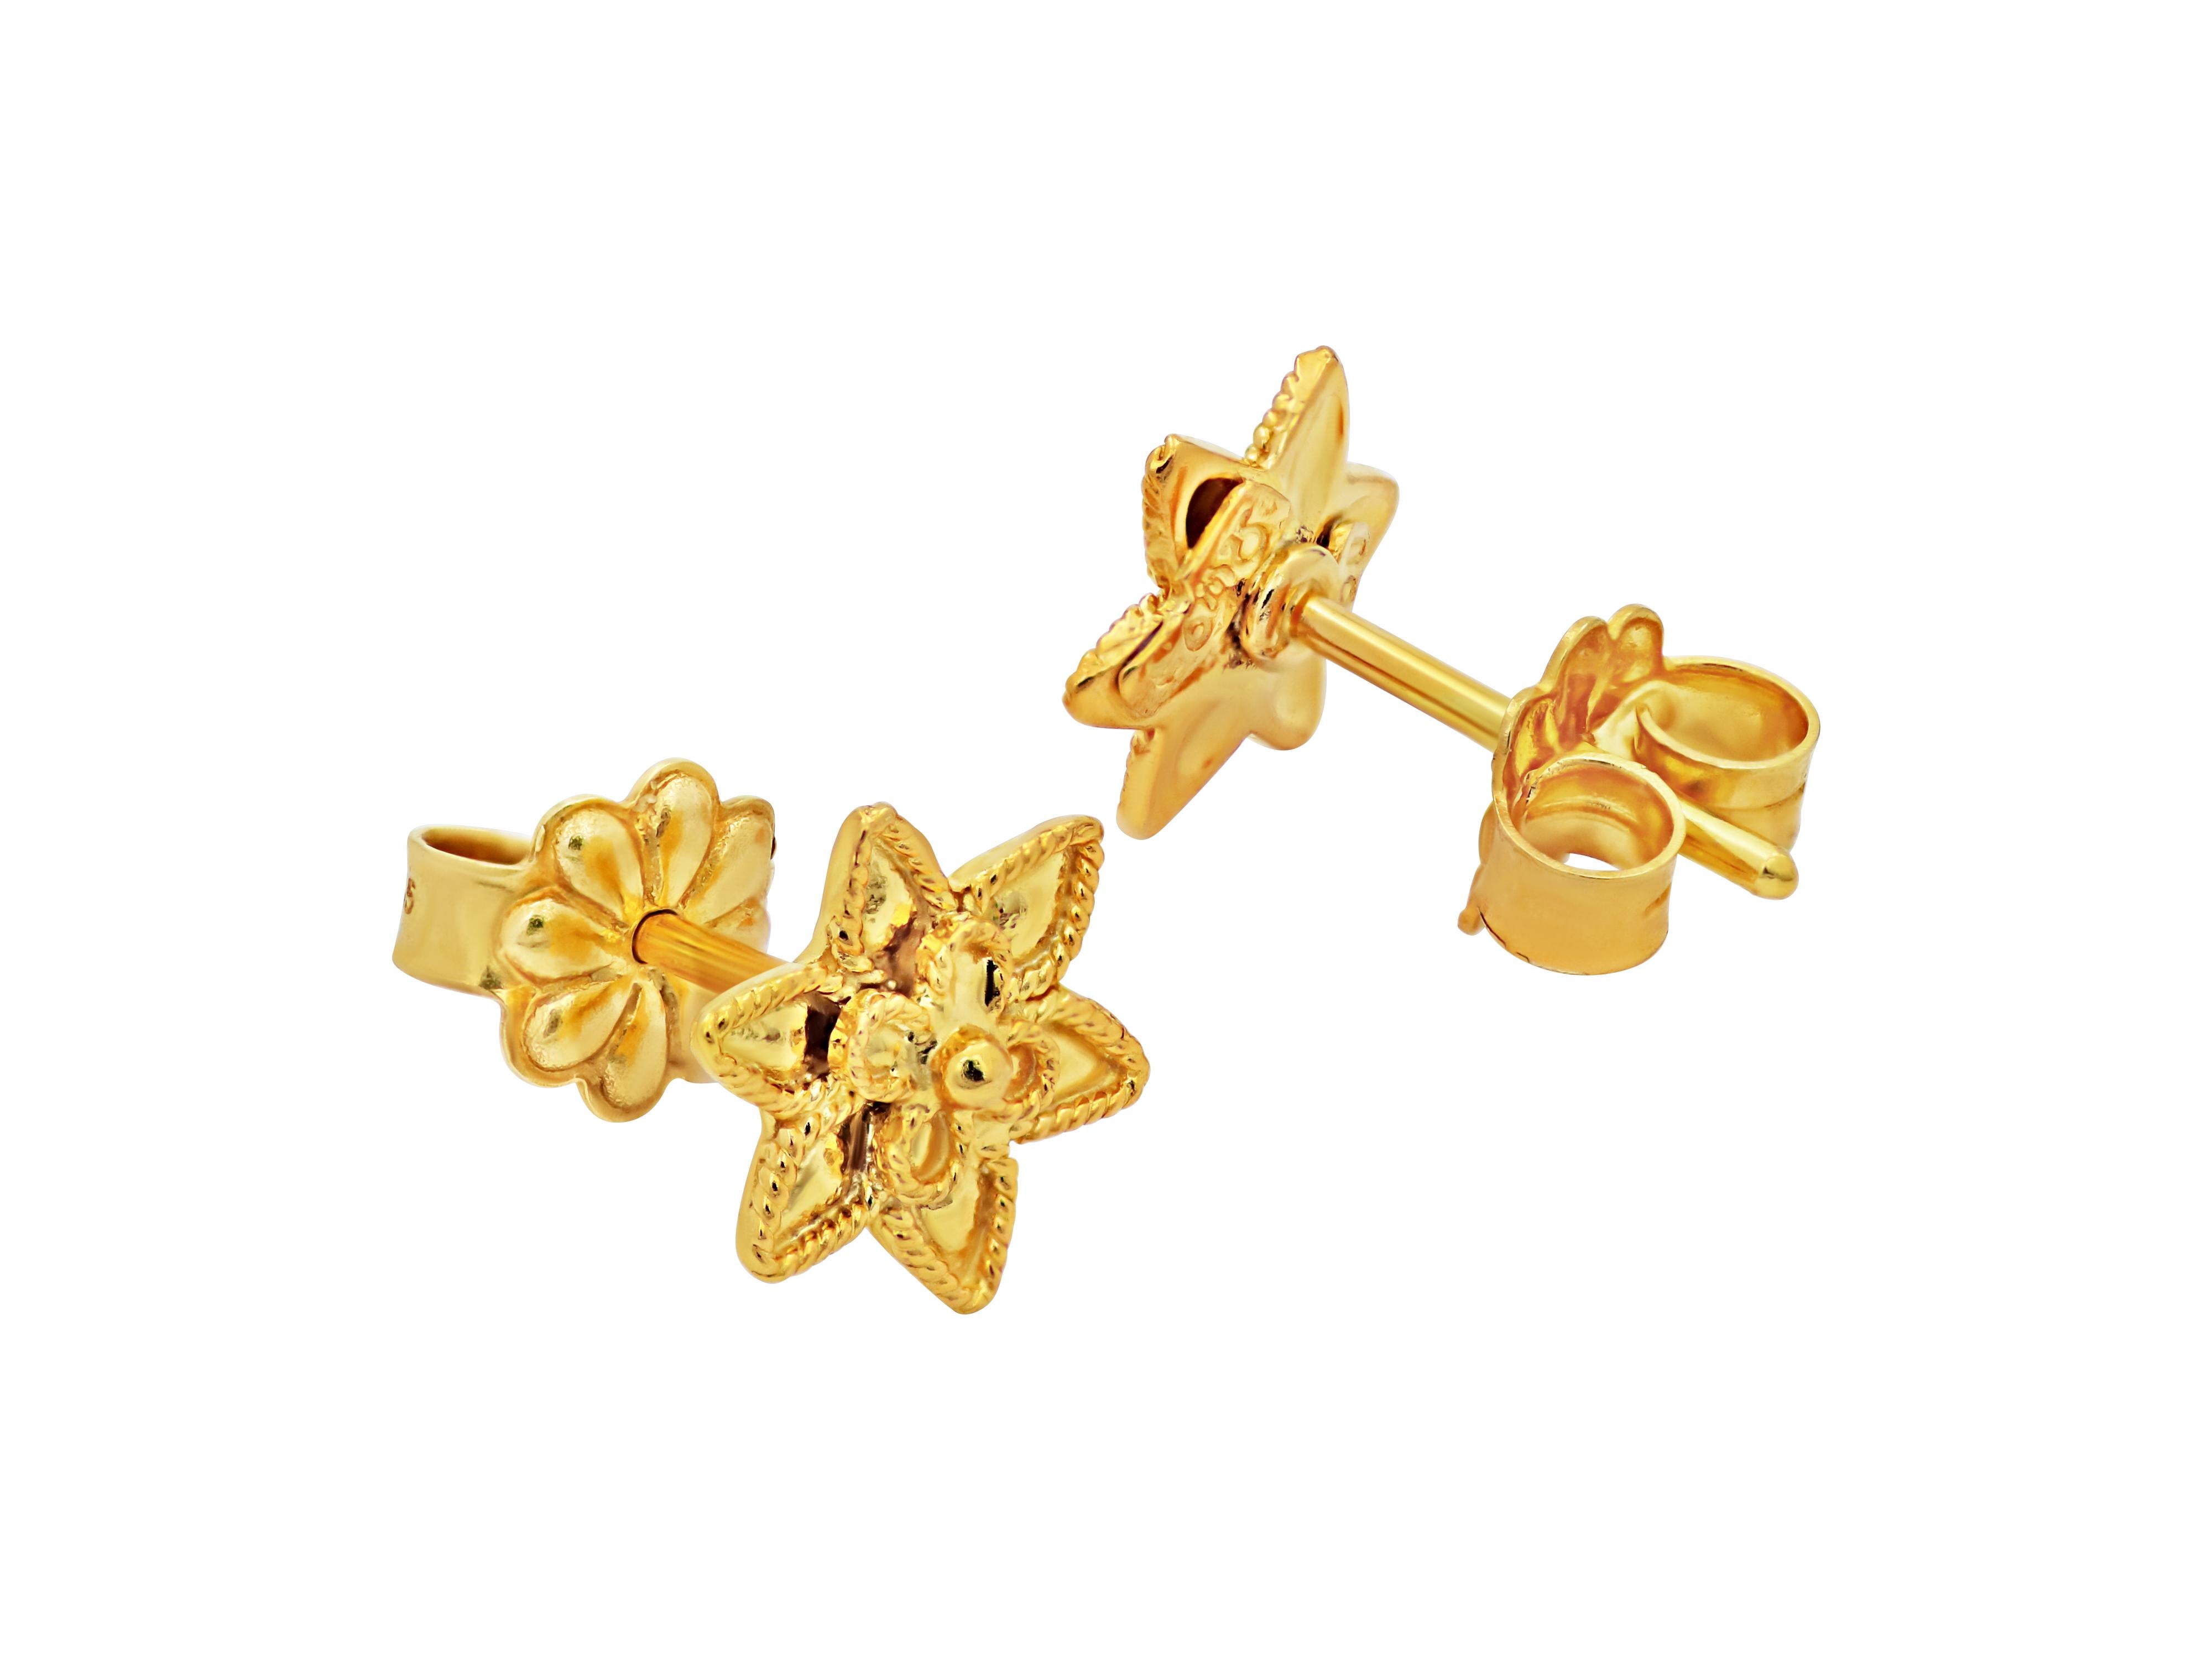 Star shape stud earrings in a small size with filigree design set with 18k yellow gold. Εach earring host a tiny daisy in the center. A neoclassical museum style work that shows class, taste and knowledge. 